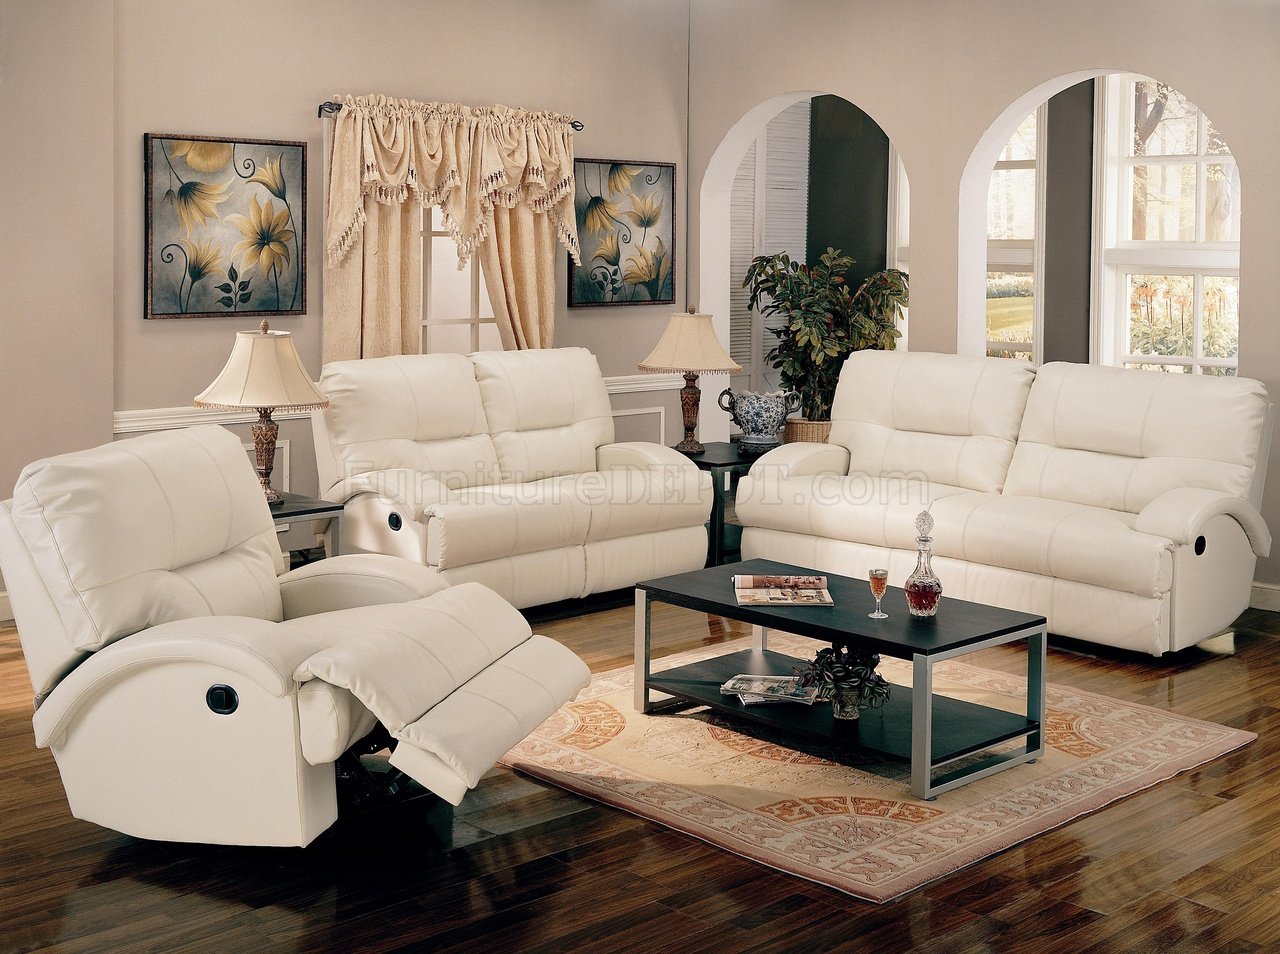 white leather sofa in living room